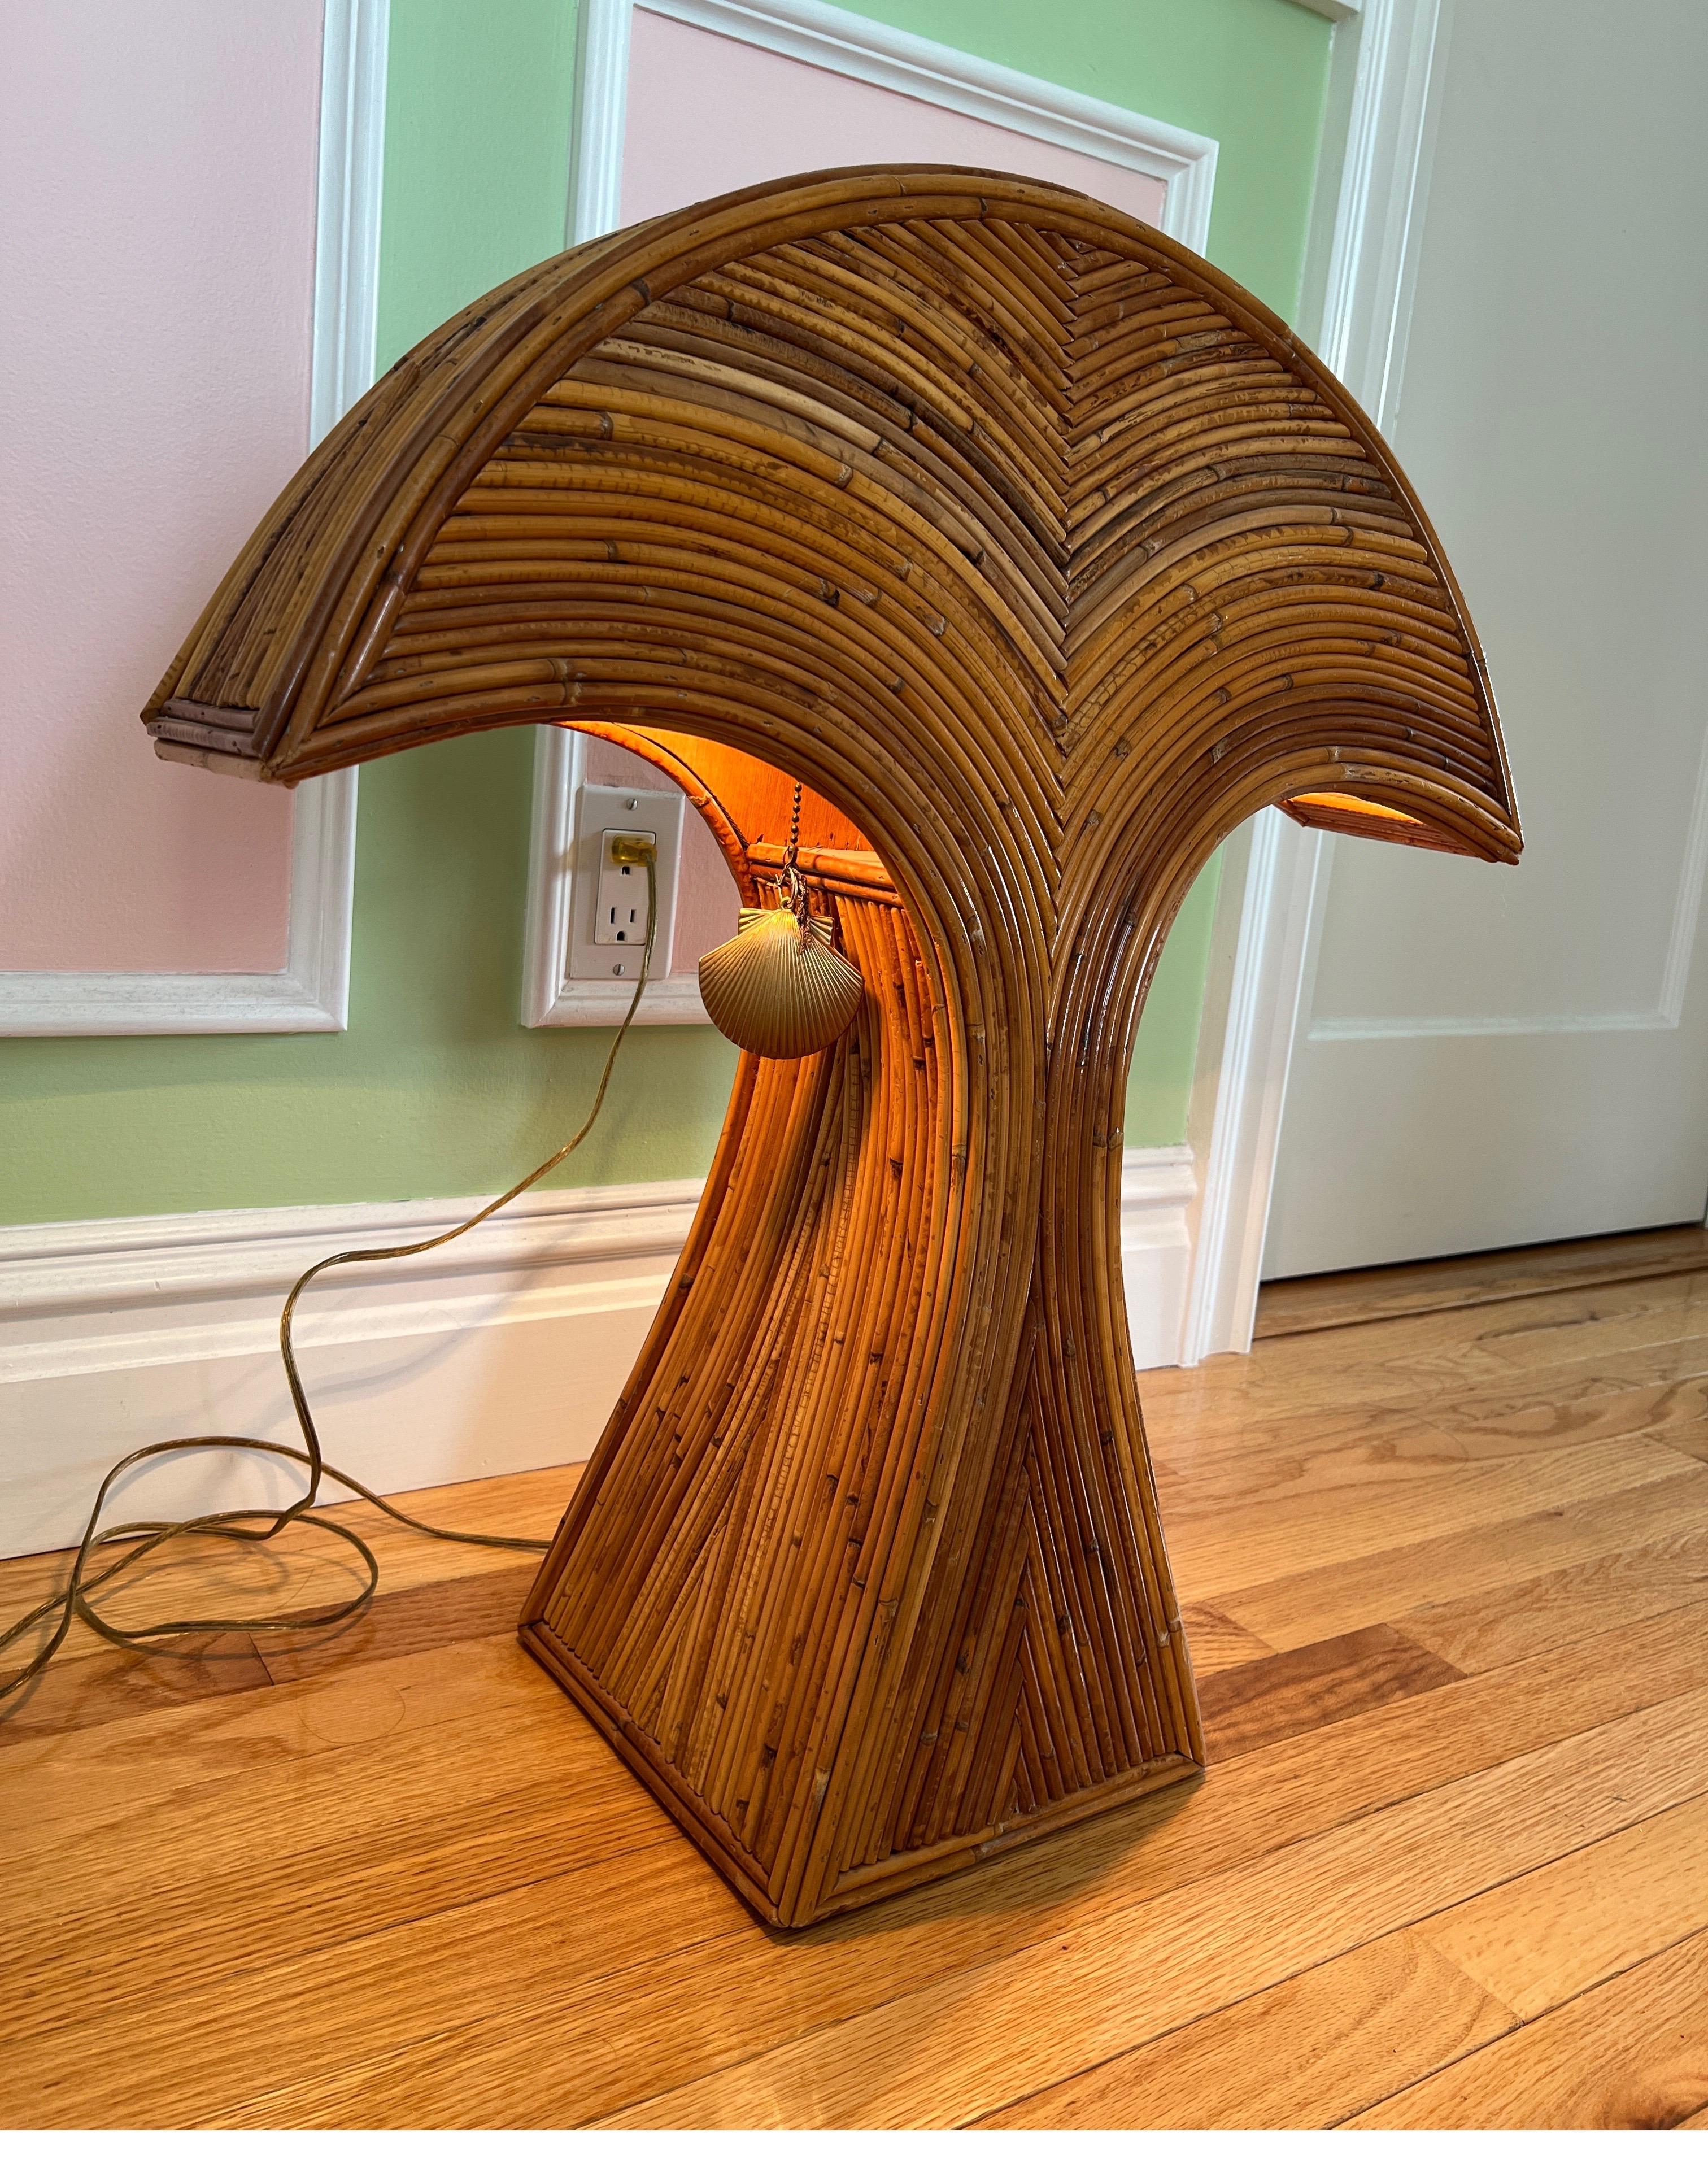 1970 Bamboo Arched Table Lamp, made in Philippines

There are two shell shaped pull chains where you can turn on just the left or right side of the light bulb. Perfect statement piece in a large space such as living room or on a entry table